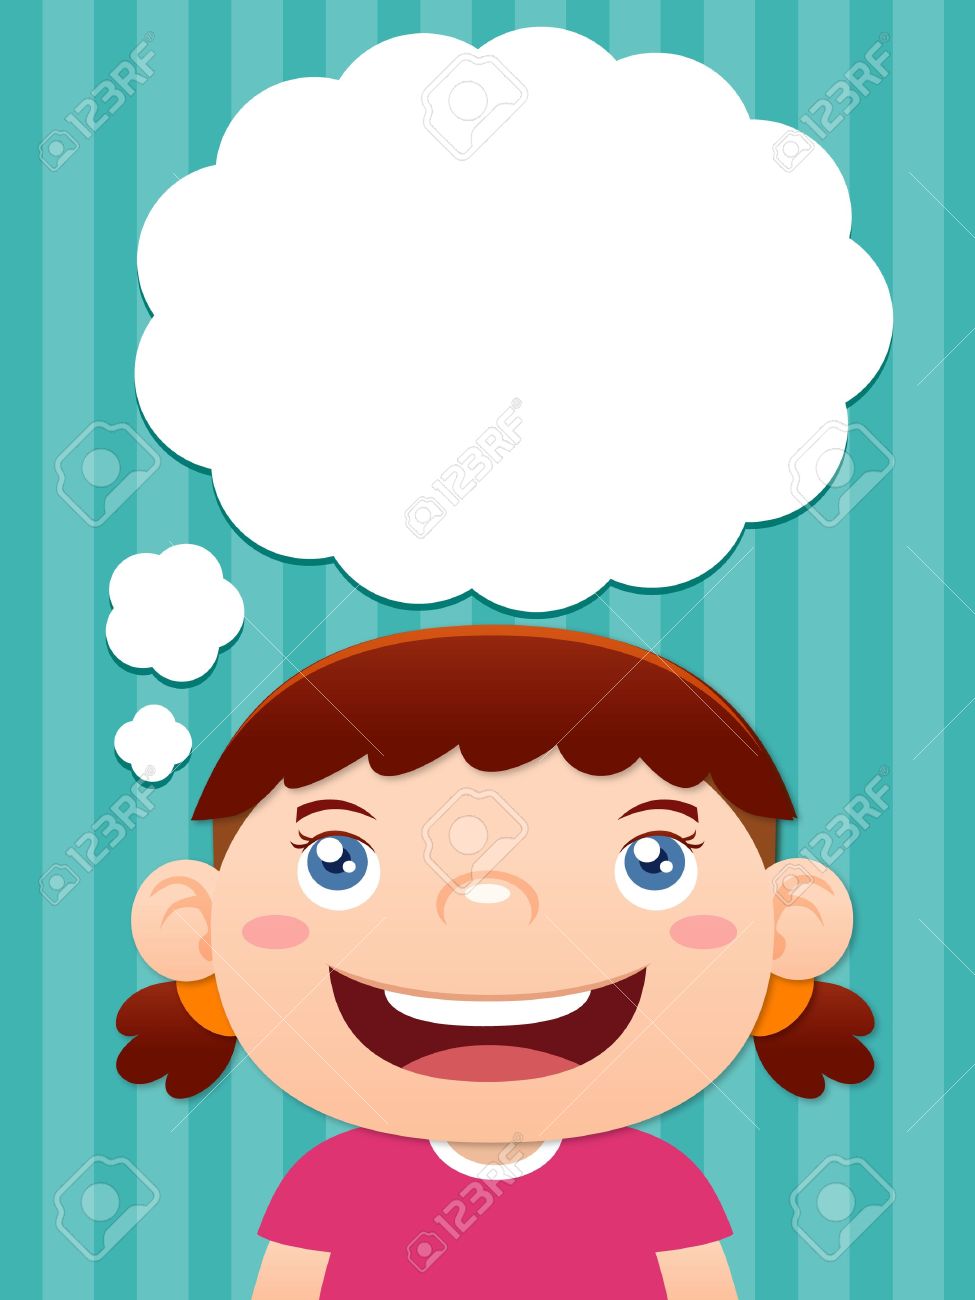 Girl thinking clipart free clip art image 2 image 2.